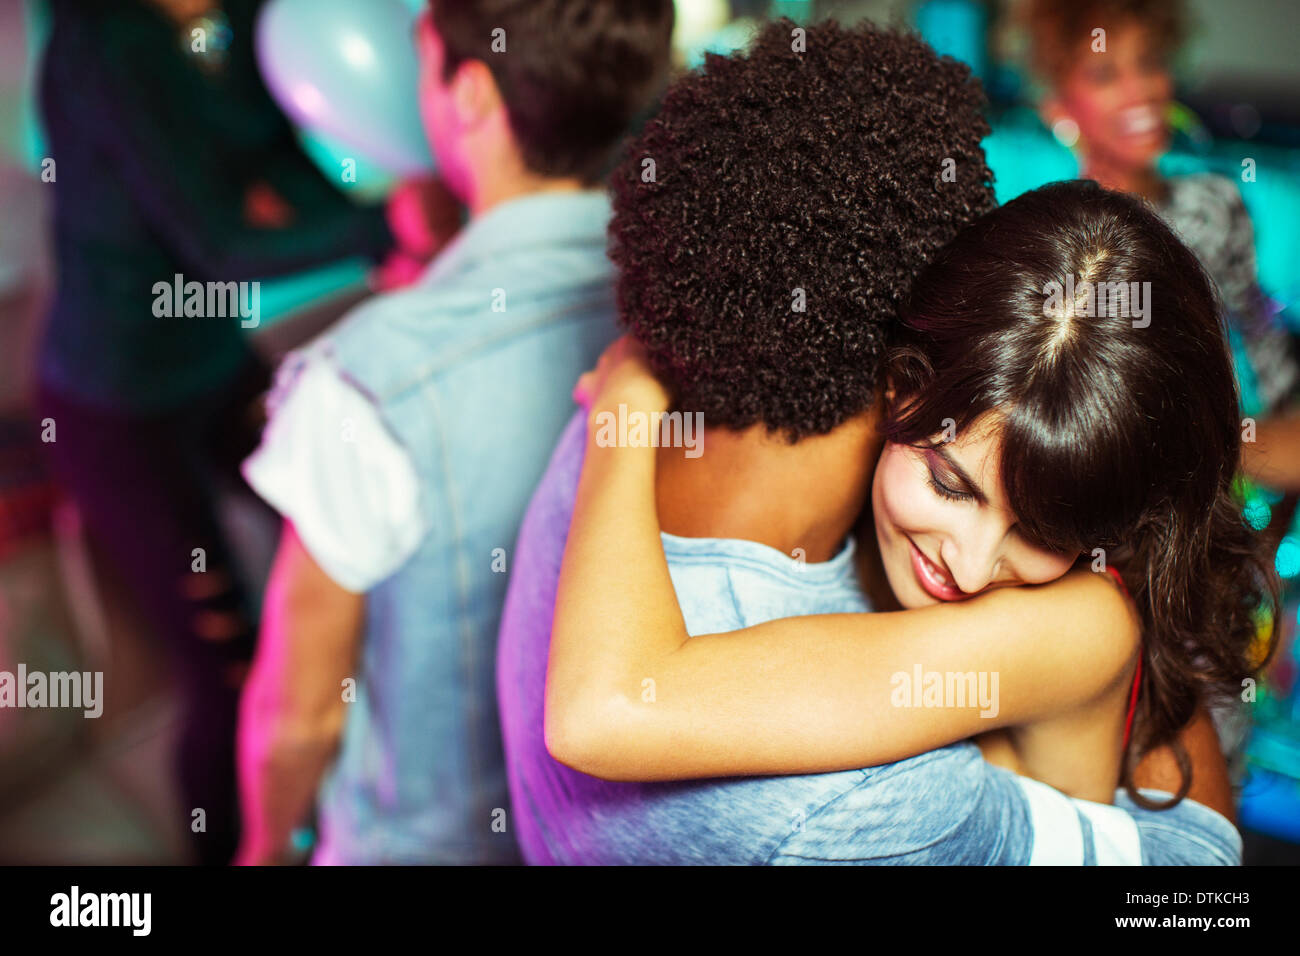 Couple dancing together at party Stock Photo